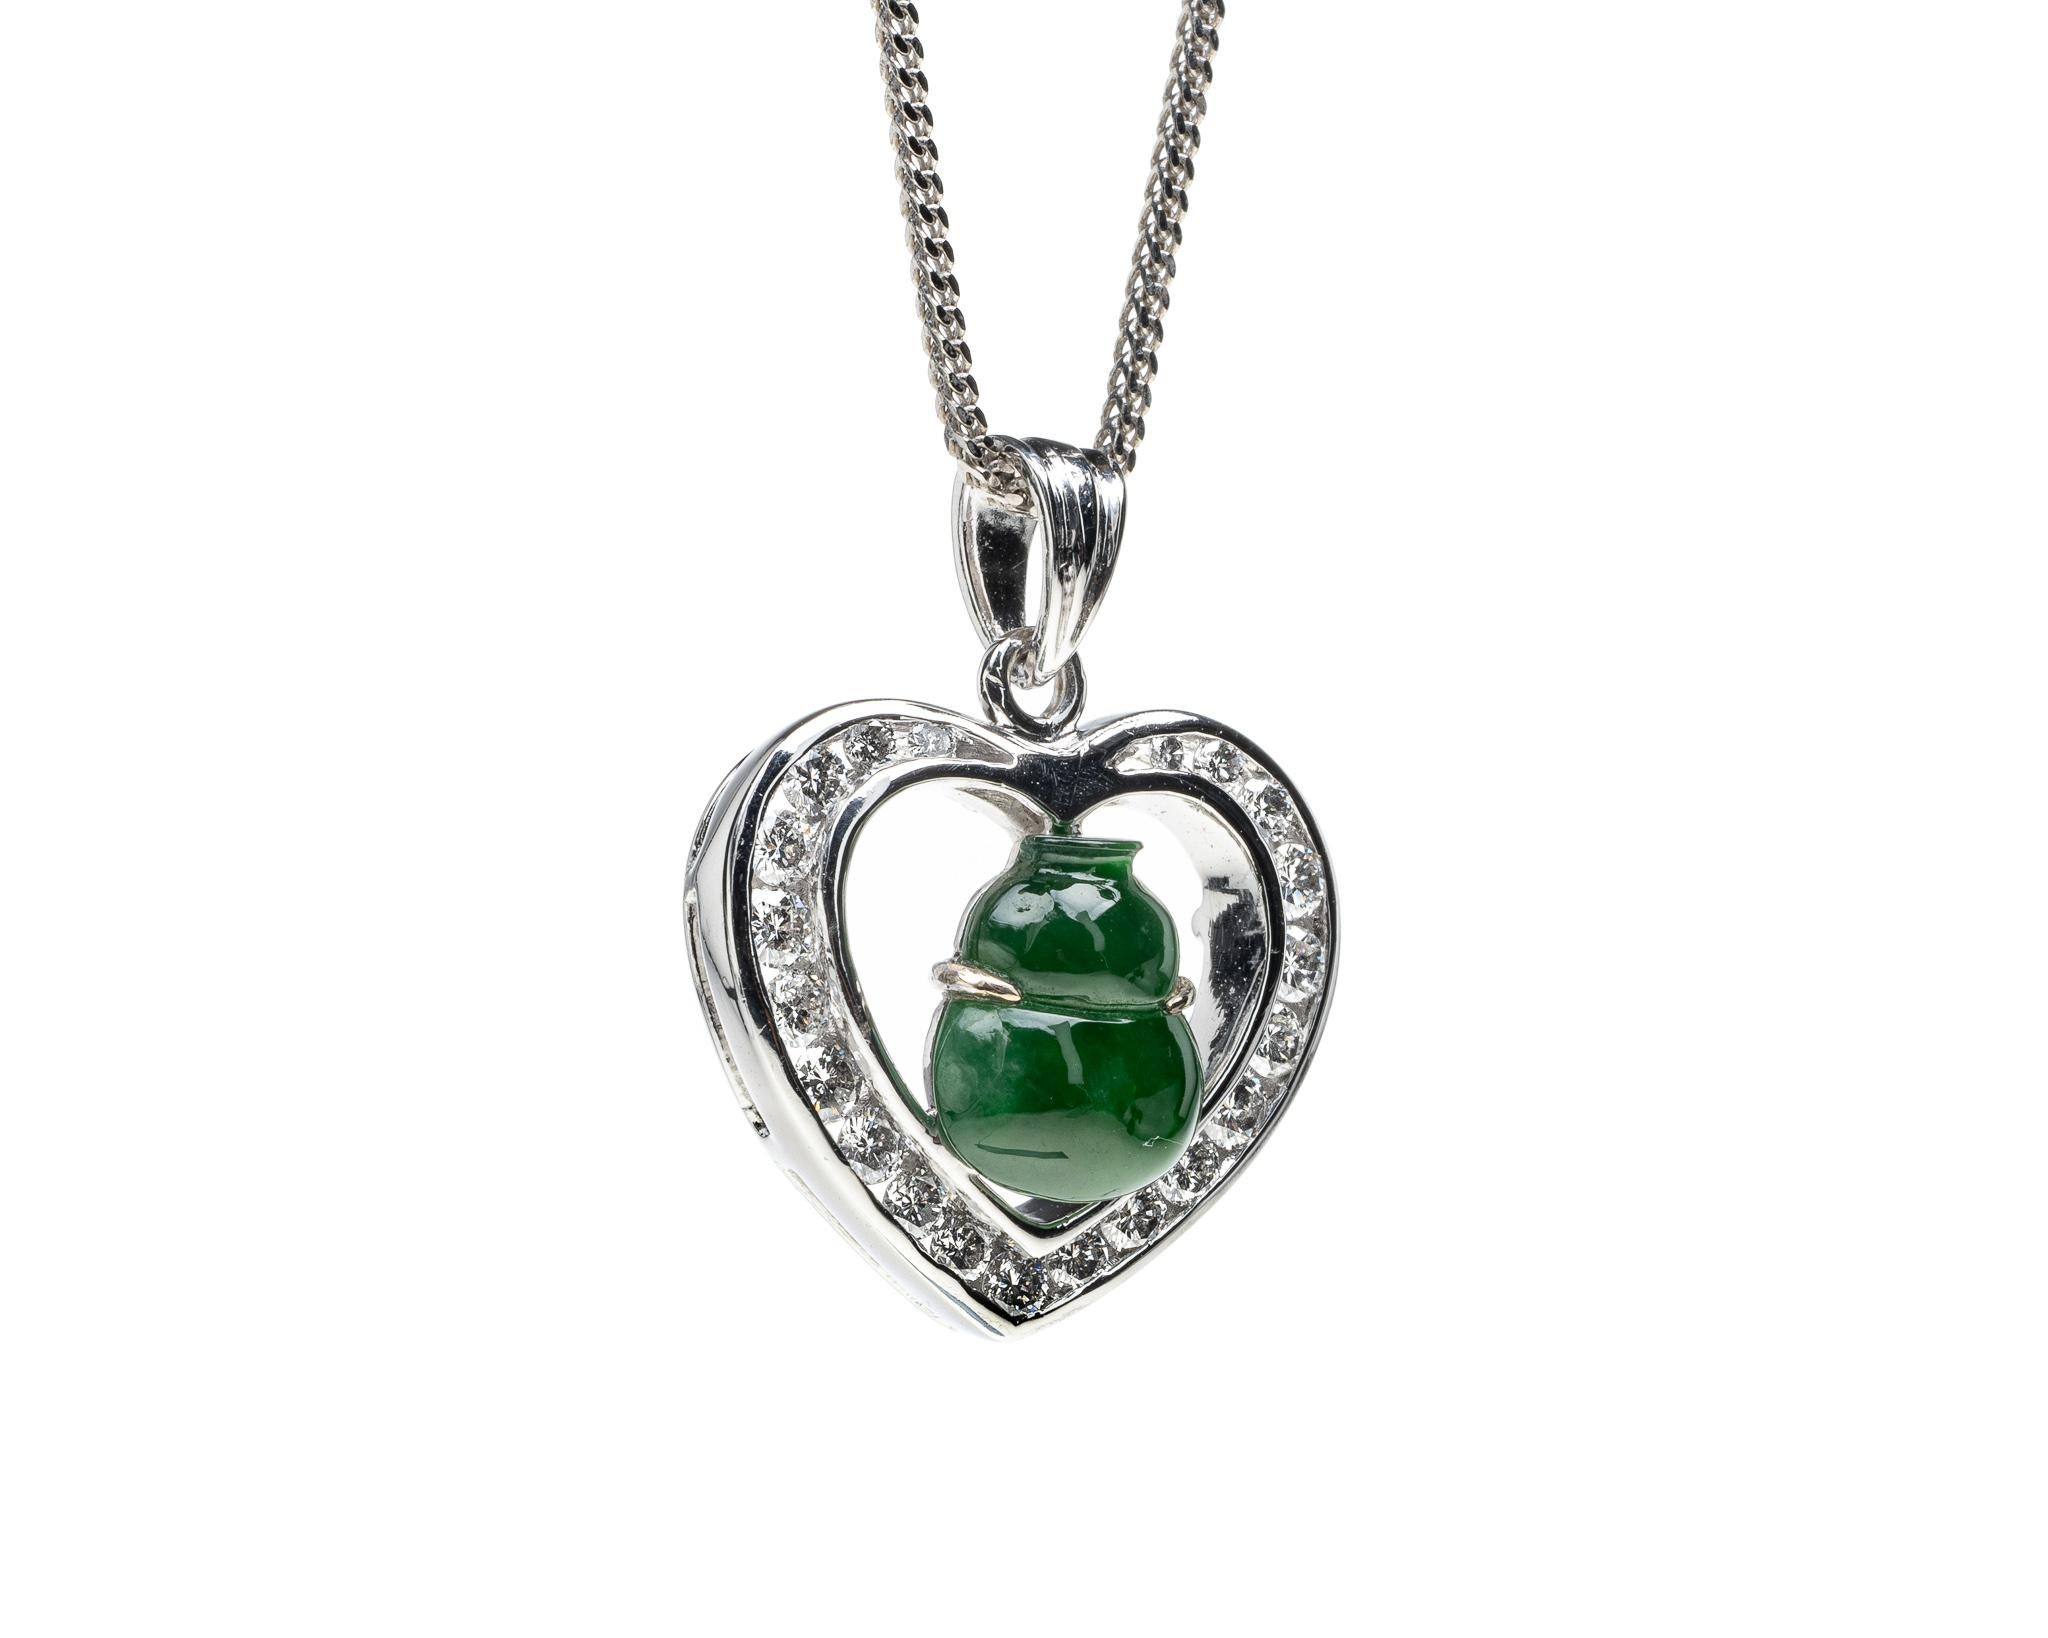 This is an all natural, untreated jadeite jade carved gourd and diamond pendant set on an 18K white gold and diamond bail.  The carved gourd symbolizes protection, great health and longevity.   

It measures 0.82 inches (21 mm) x 0.71 inches (18.1